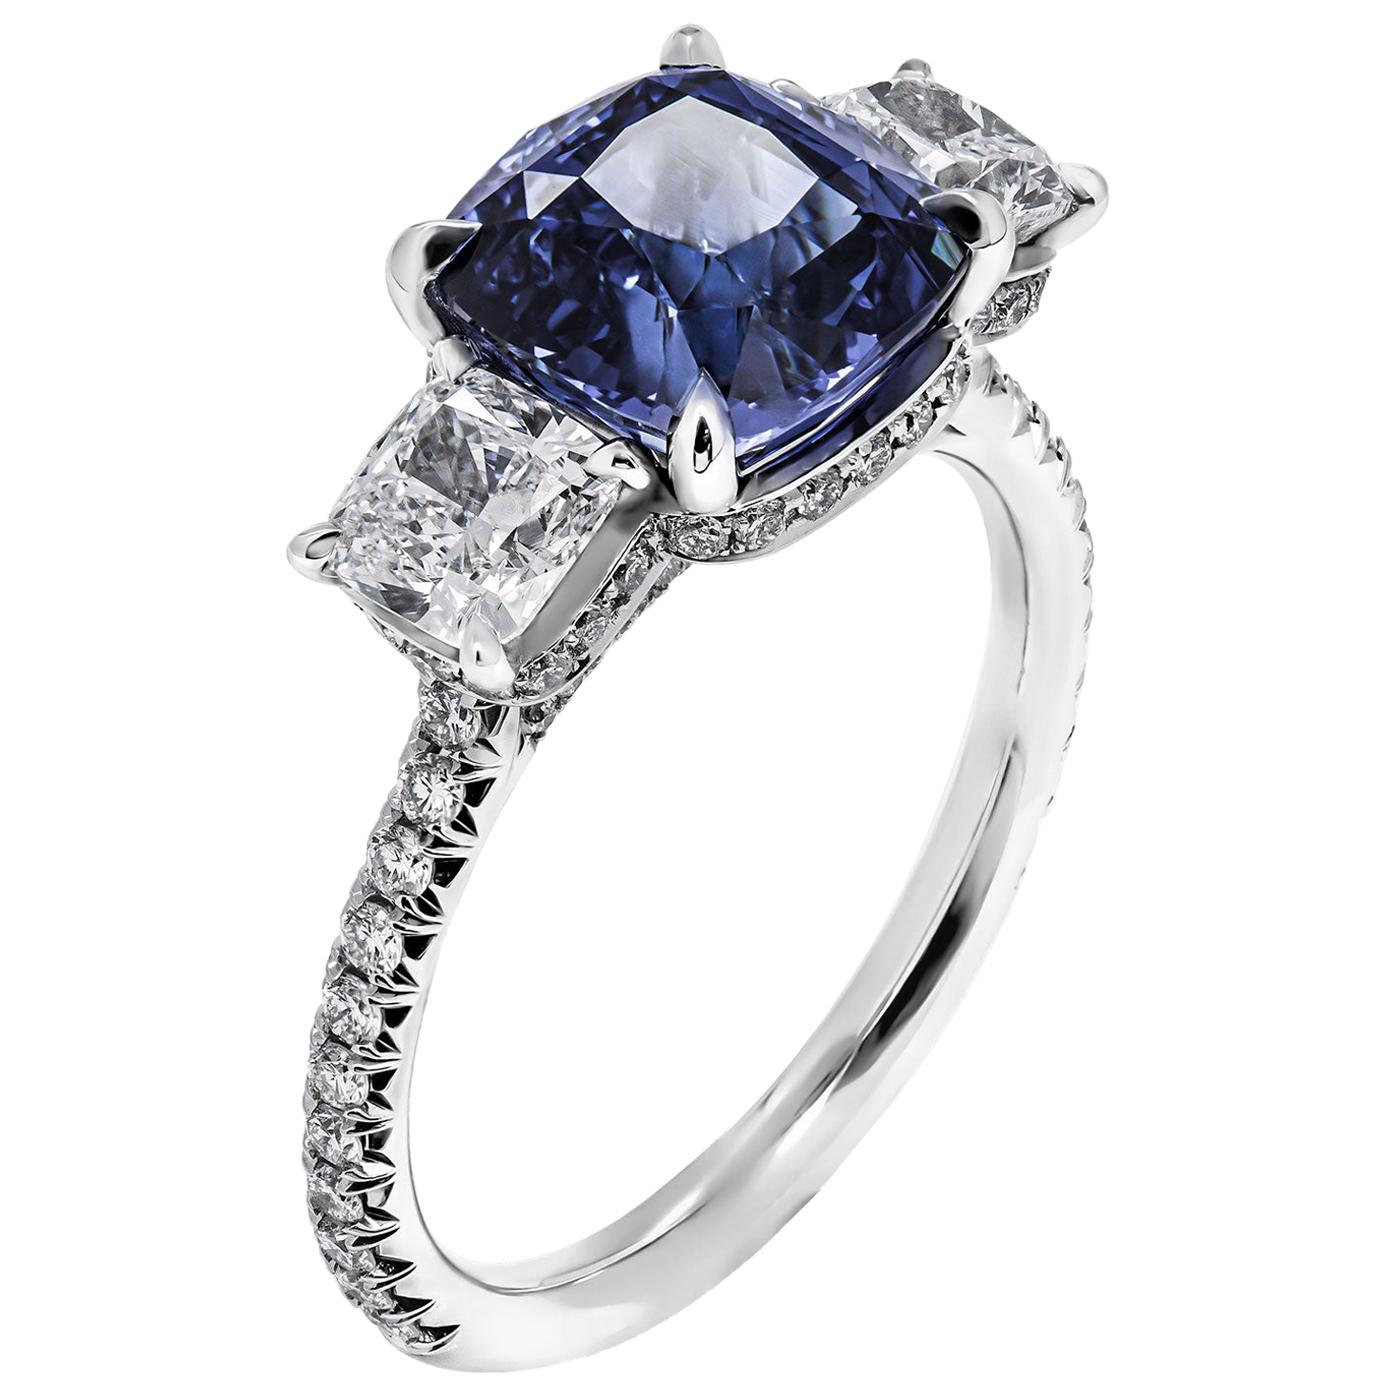 3-Stone Ring with 3.59 Carat Blue Sapphire